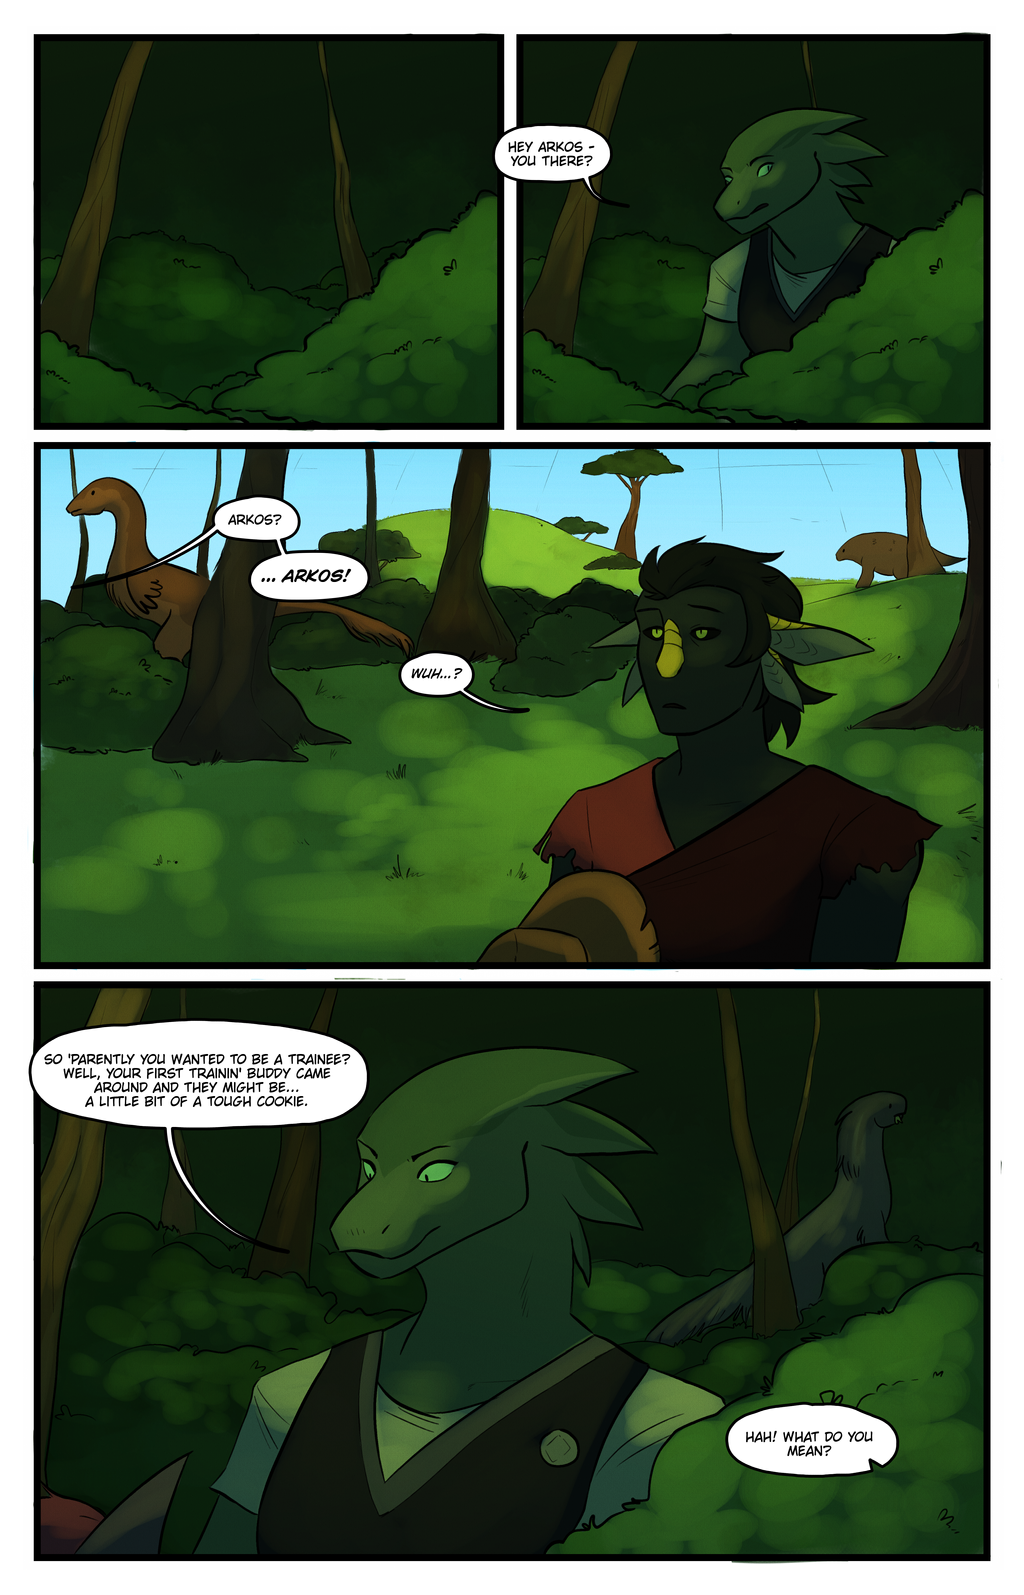 escape___page_19_by_wolfsandfire-dc7n812.png